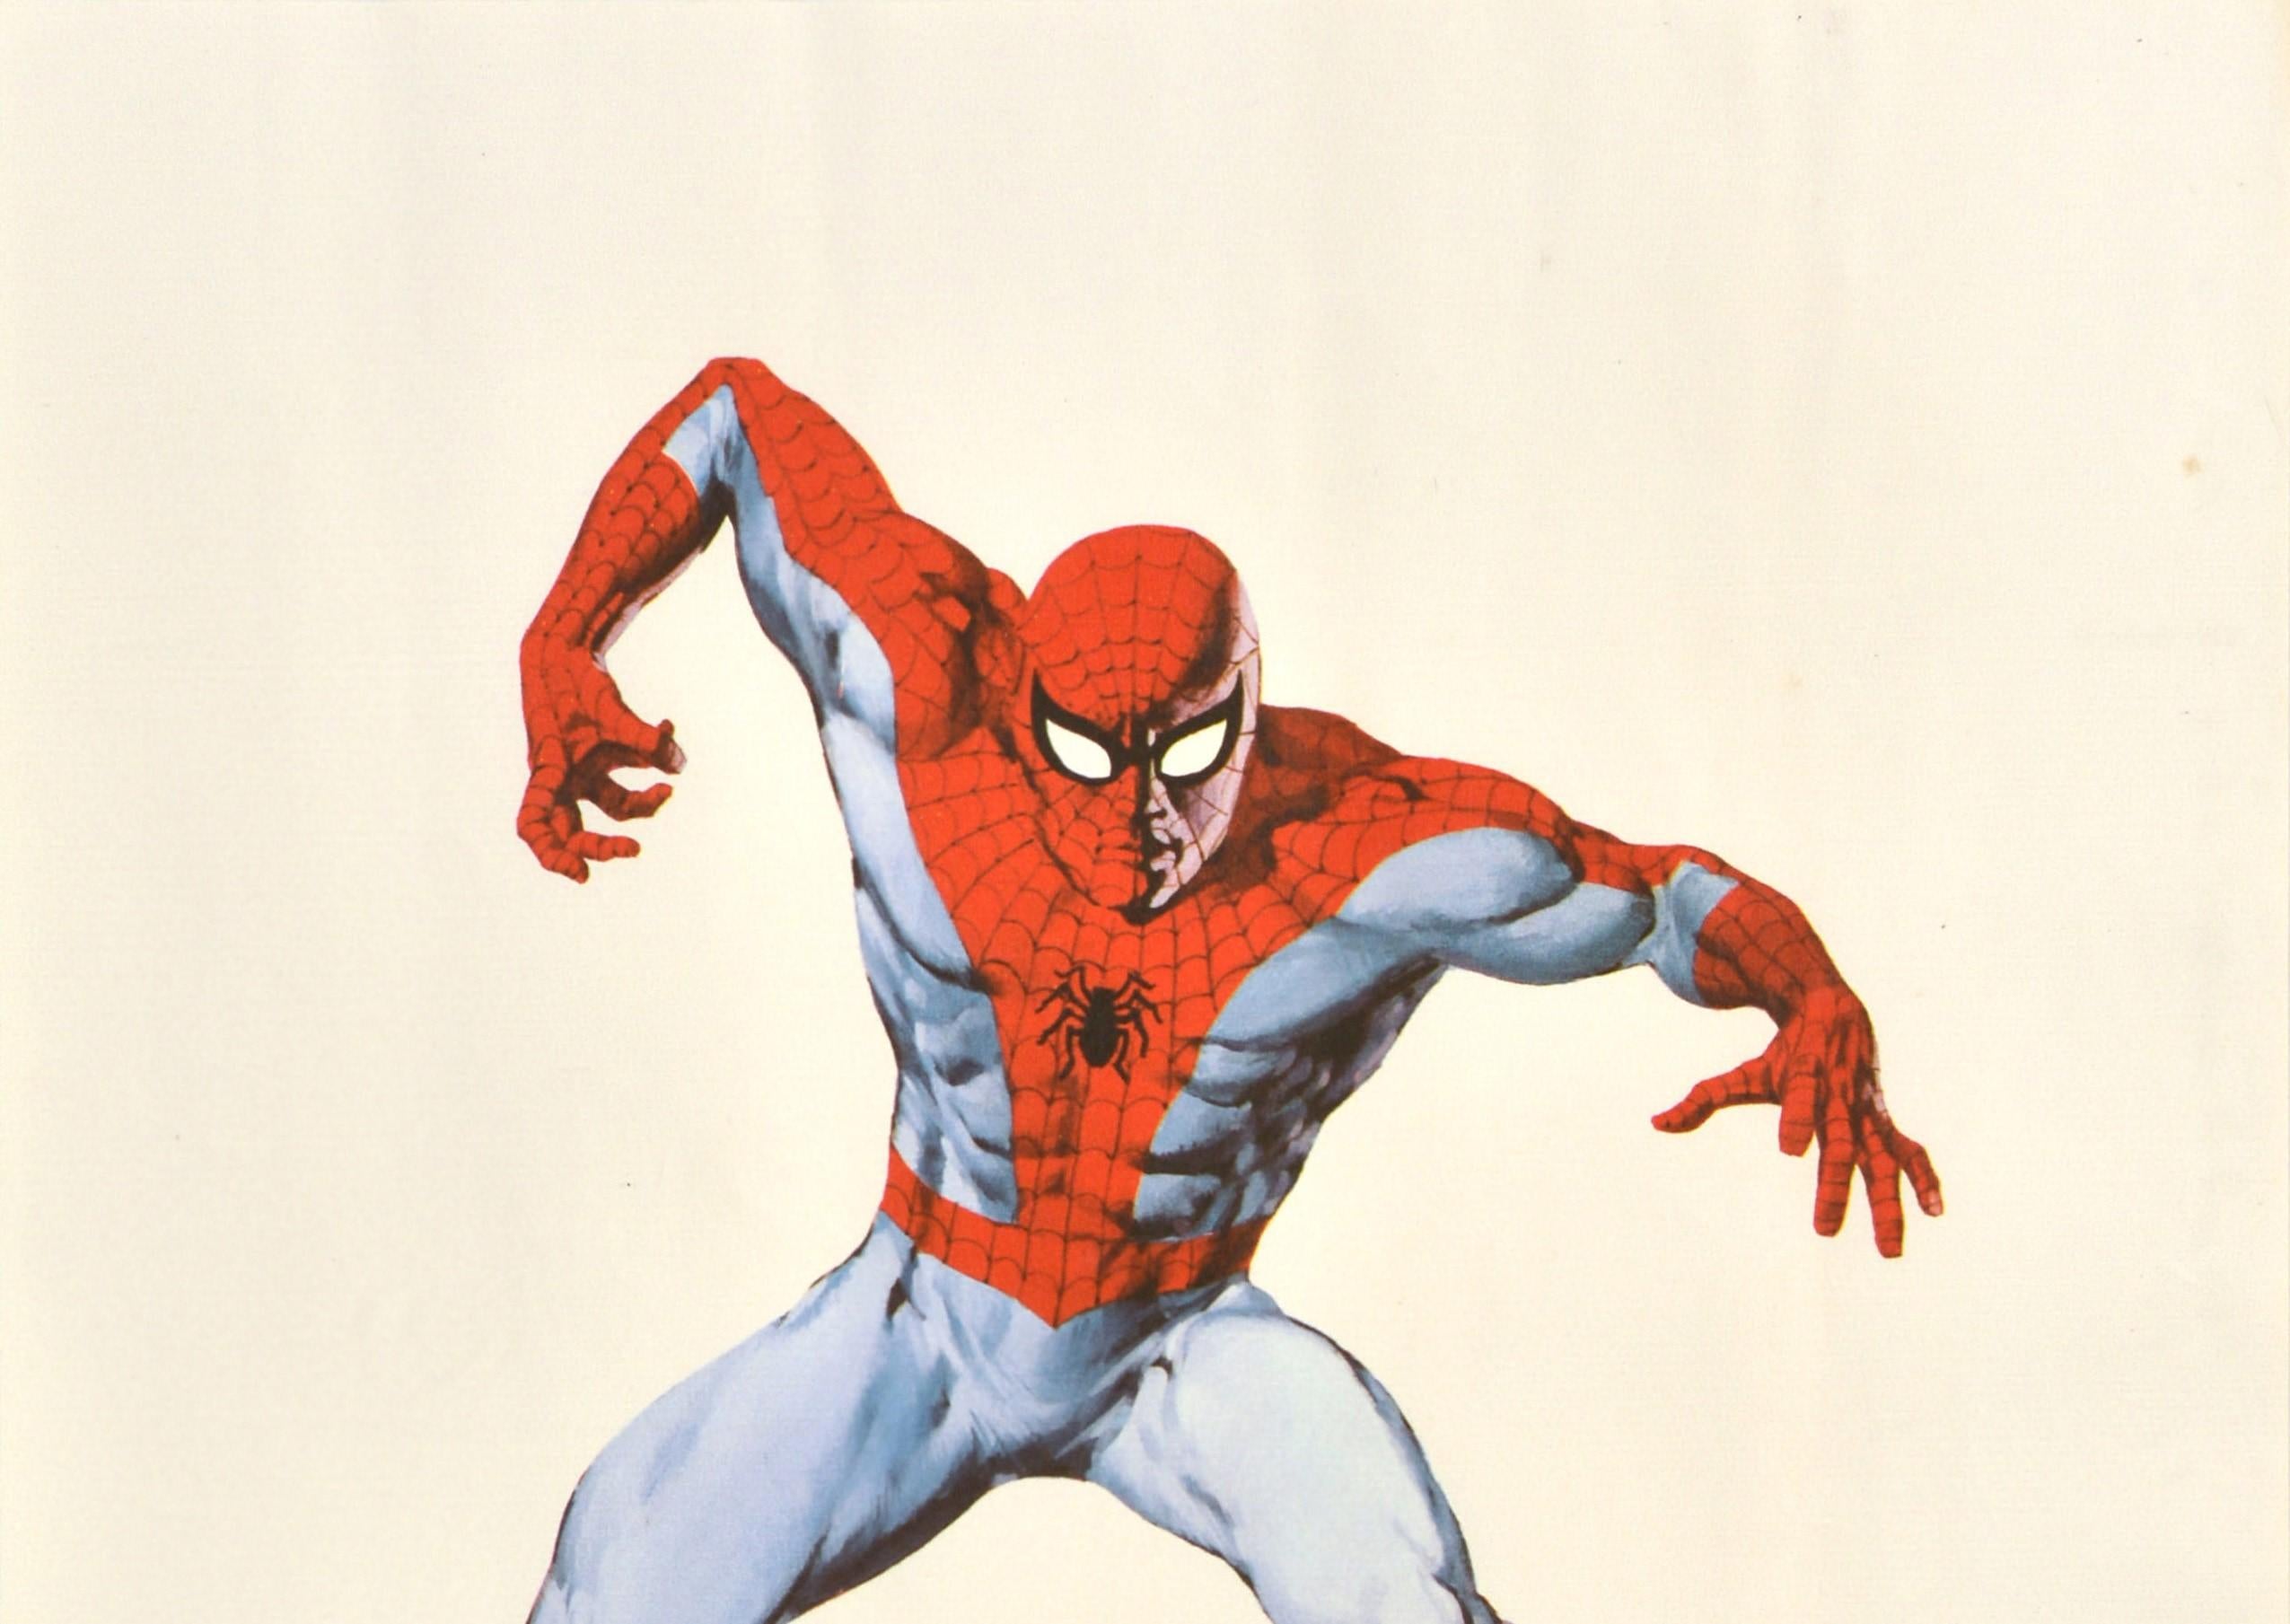 Spiderman Poster - 2 For Sale on 1stDibs | spiderman posters for sale